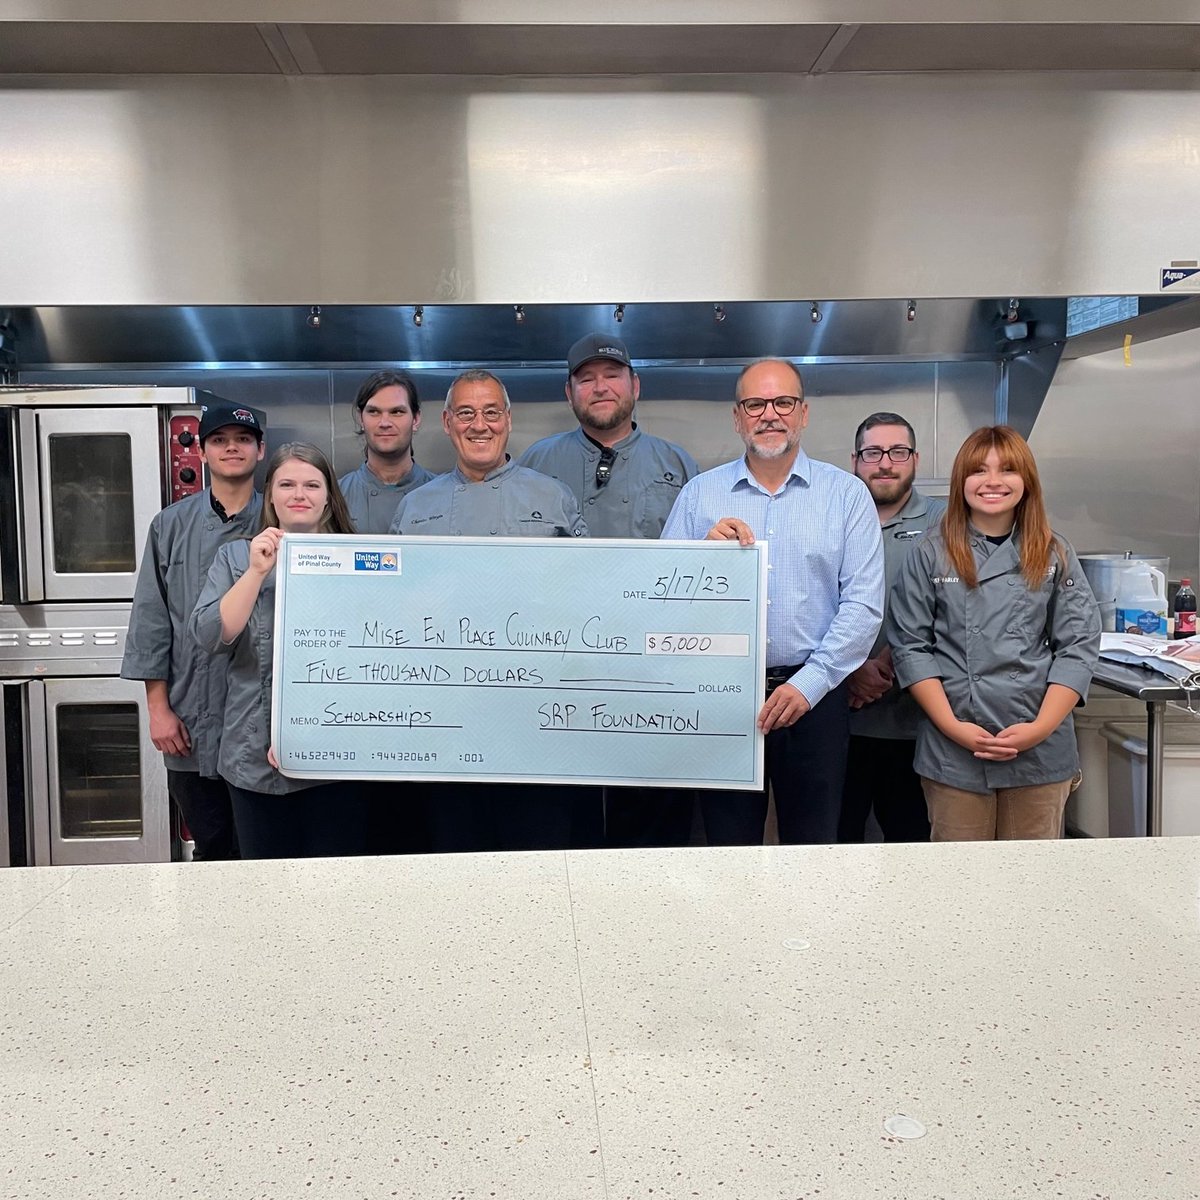 Very excited to award CAC Mise En Place with a $5,000 gift from @SRPconnect to benefit the Caleb Rodriguez Culinary Scholarship. 
To learn more about the scholarship & culinary program, visit their website: t.ly/Ka1j0
Together, we can make a difference.
#LiveUnited